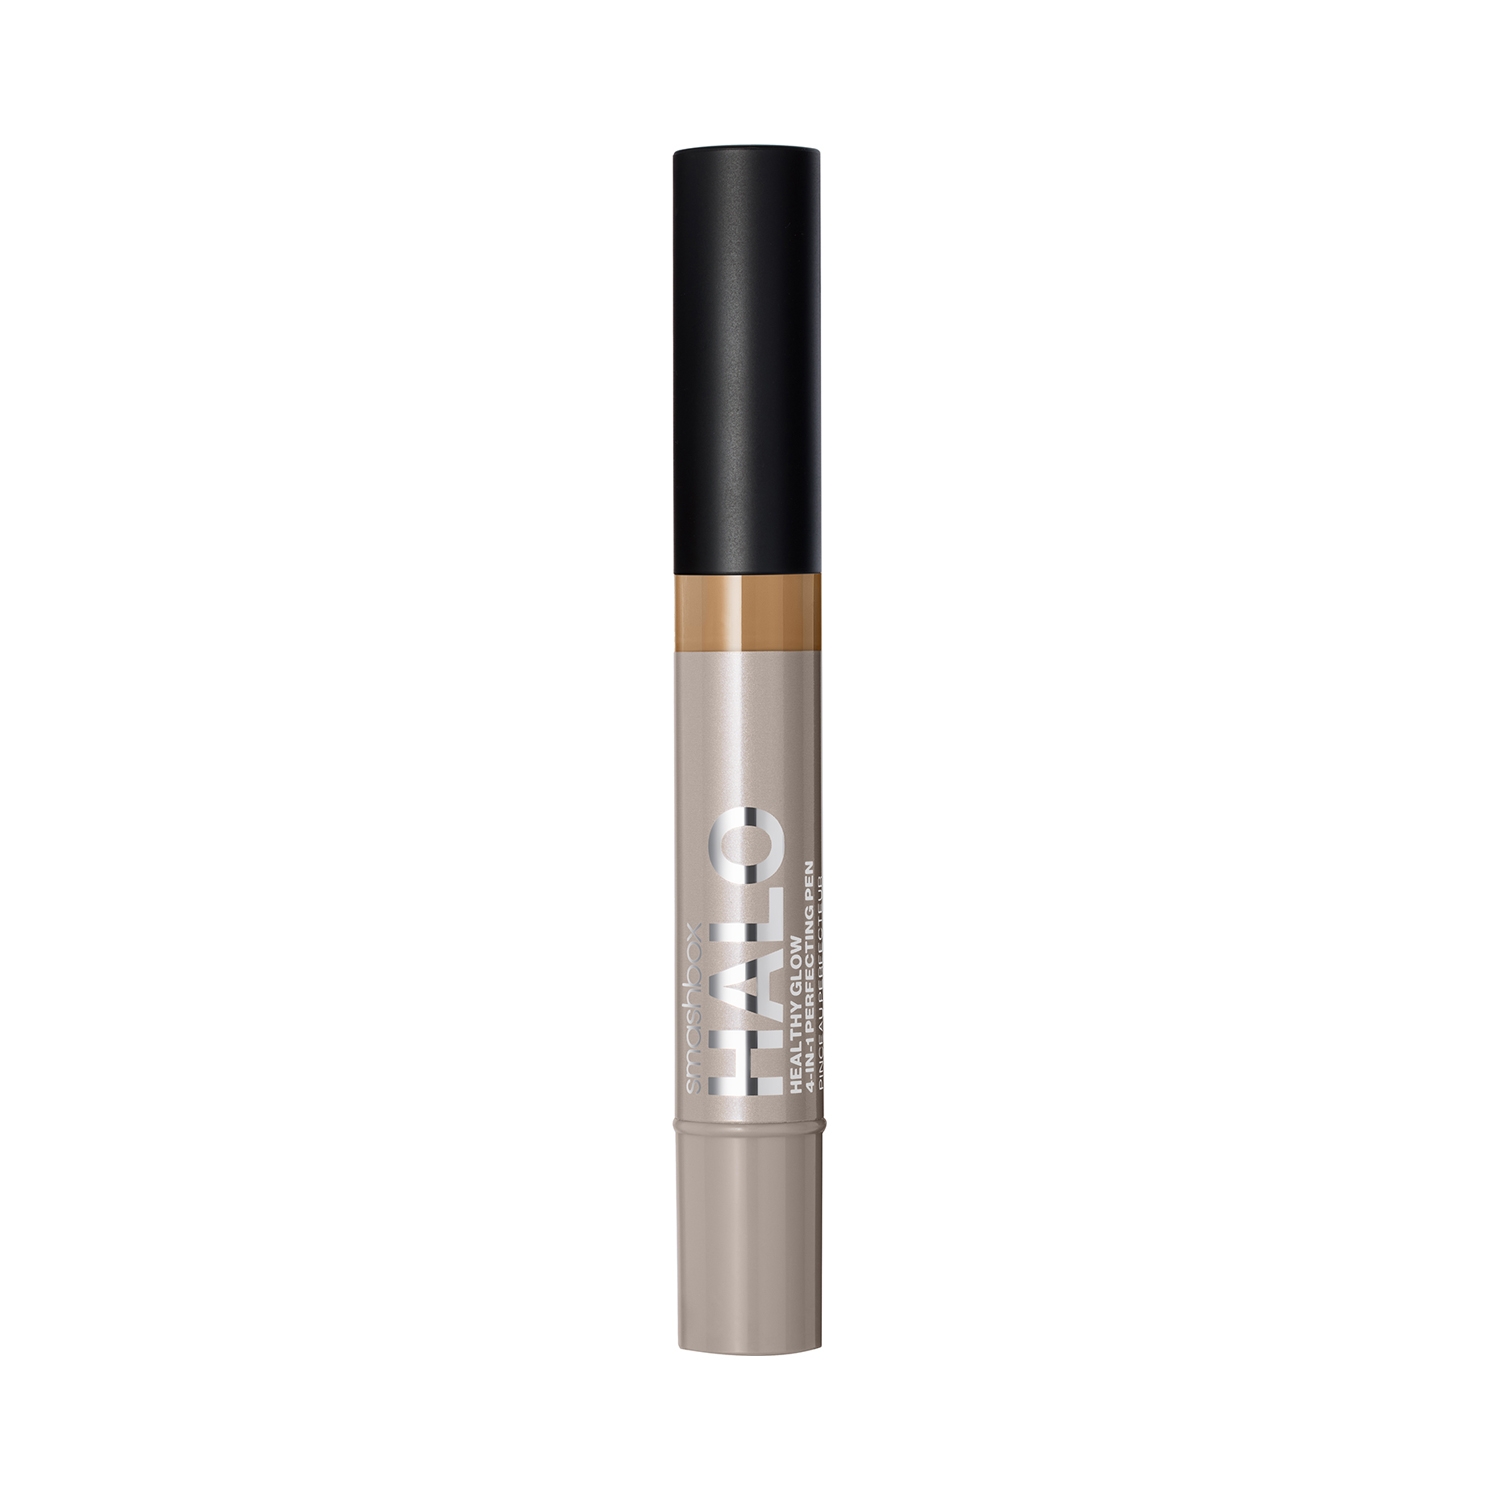 Smashbox | Smashbox Halo Healthy Glow 4-In-1 Perfecting Concealer Pen - M20W (3.5ml)